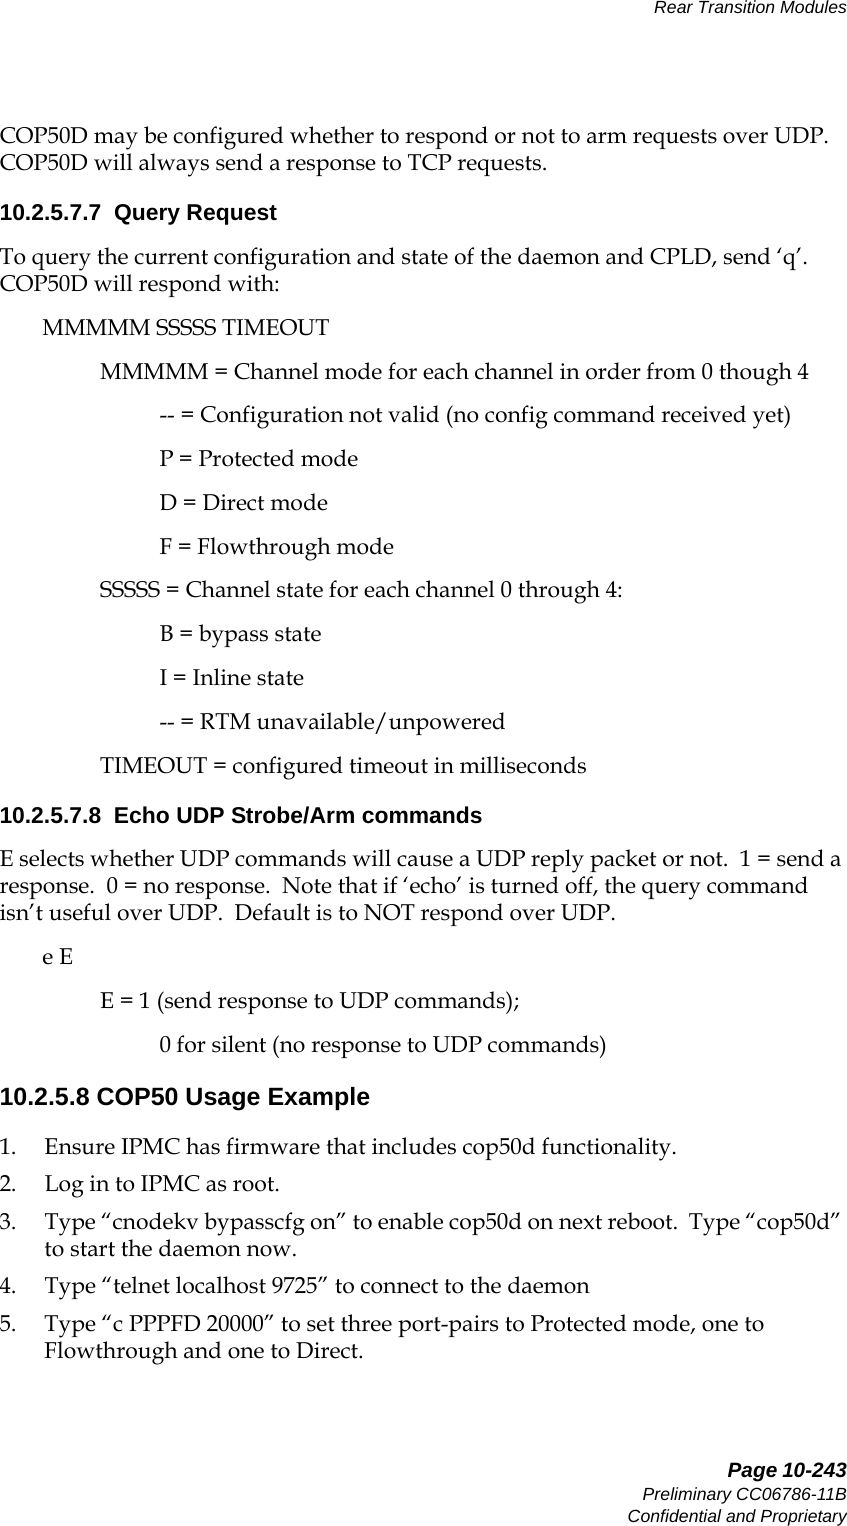   Page 10-243Preliminary CC06786-11BConfidential and ProprietaryRear Transition Modules14ABABPreliminaryCOP50D may be configured whether to respond or not to arm requests over UDP.   COP50D will always send a response to TCP requests.10.2.5.7.7  Query RequestTo query the current configuration and state of the daemon and CPLD, send ‘q’.  COP50D will respond with:MMMMM SSSSS TIMEOUTMMMMM = Channel mode for each channel in order from 0 though 4-- = Configuration not valid (no config command received yet)P = Protected modeD = Direct modeF = Flowthrough modeSSSSS = Channel state for each channel 0 through 4:B = bypass stateI = Inline state-- = RTM unavailable/unpoweredTIMEOUT = configured timeout in milliseconds10.2.5.7.8  Echo UDP Strobe/Arm commandsE selects whether UDP commands will cause a UDP reply packet or not.  1 = send a response.  0 = no response.  Note that if ‘echo’ is turned off, the query command isn’t useful over UDP.  Default is to NOT respond over UDP.e EE = 1 (send response to UDP commands);   0 for silent (no response to UDP commands)10.2.5.8 COP50 Usage Example1. Ensure IPMC has firmware that includes cop50d functionality.2. Log in to IPMC as root.3. Type “cnodekv bypasscfg on” to enable cop50d on next reboot.  Type “cop50d” to start the daemon now.4. Type “telnet localhost 9725” to connect to the daemon5. Type “c PPPFD 20000” to set three port-pairs to Protected mode, one to Flowthrough and one to Direct.